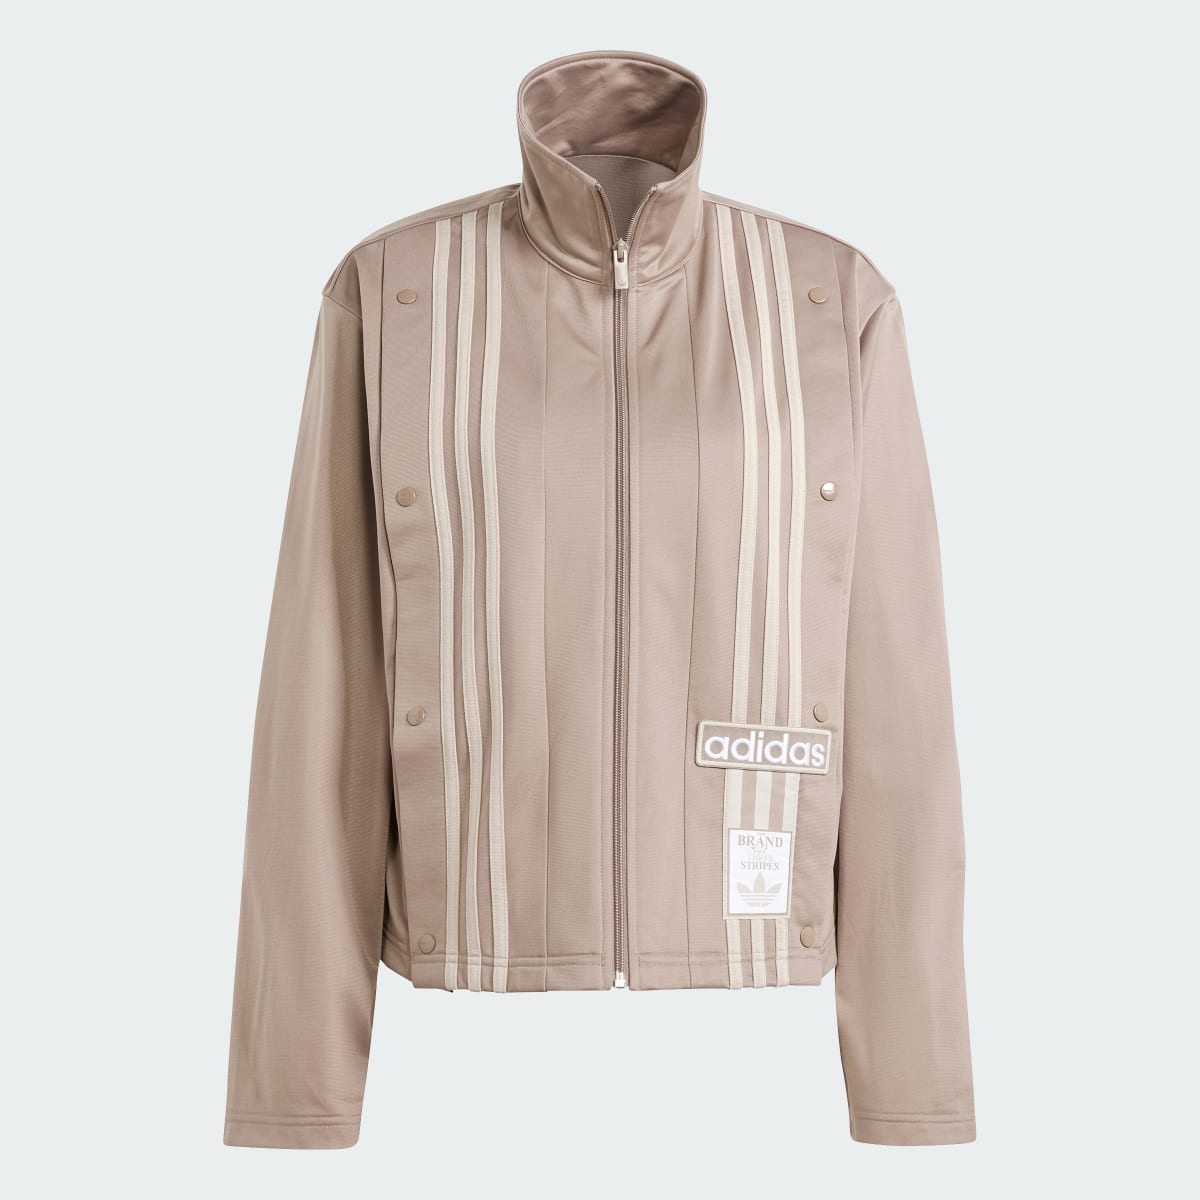 Adidas Neutral Court Track Top. 5